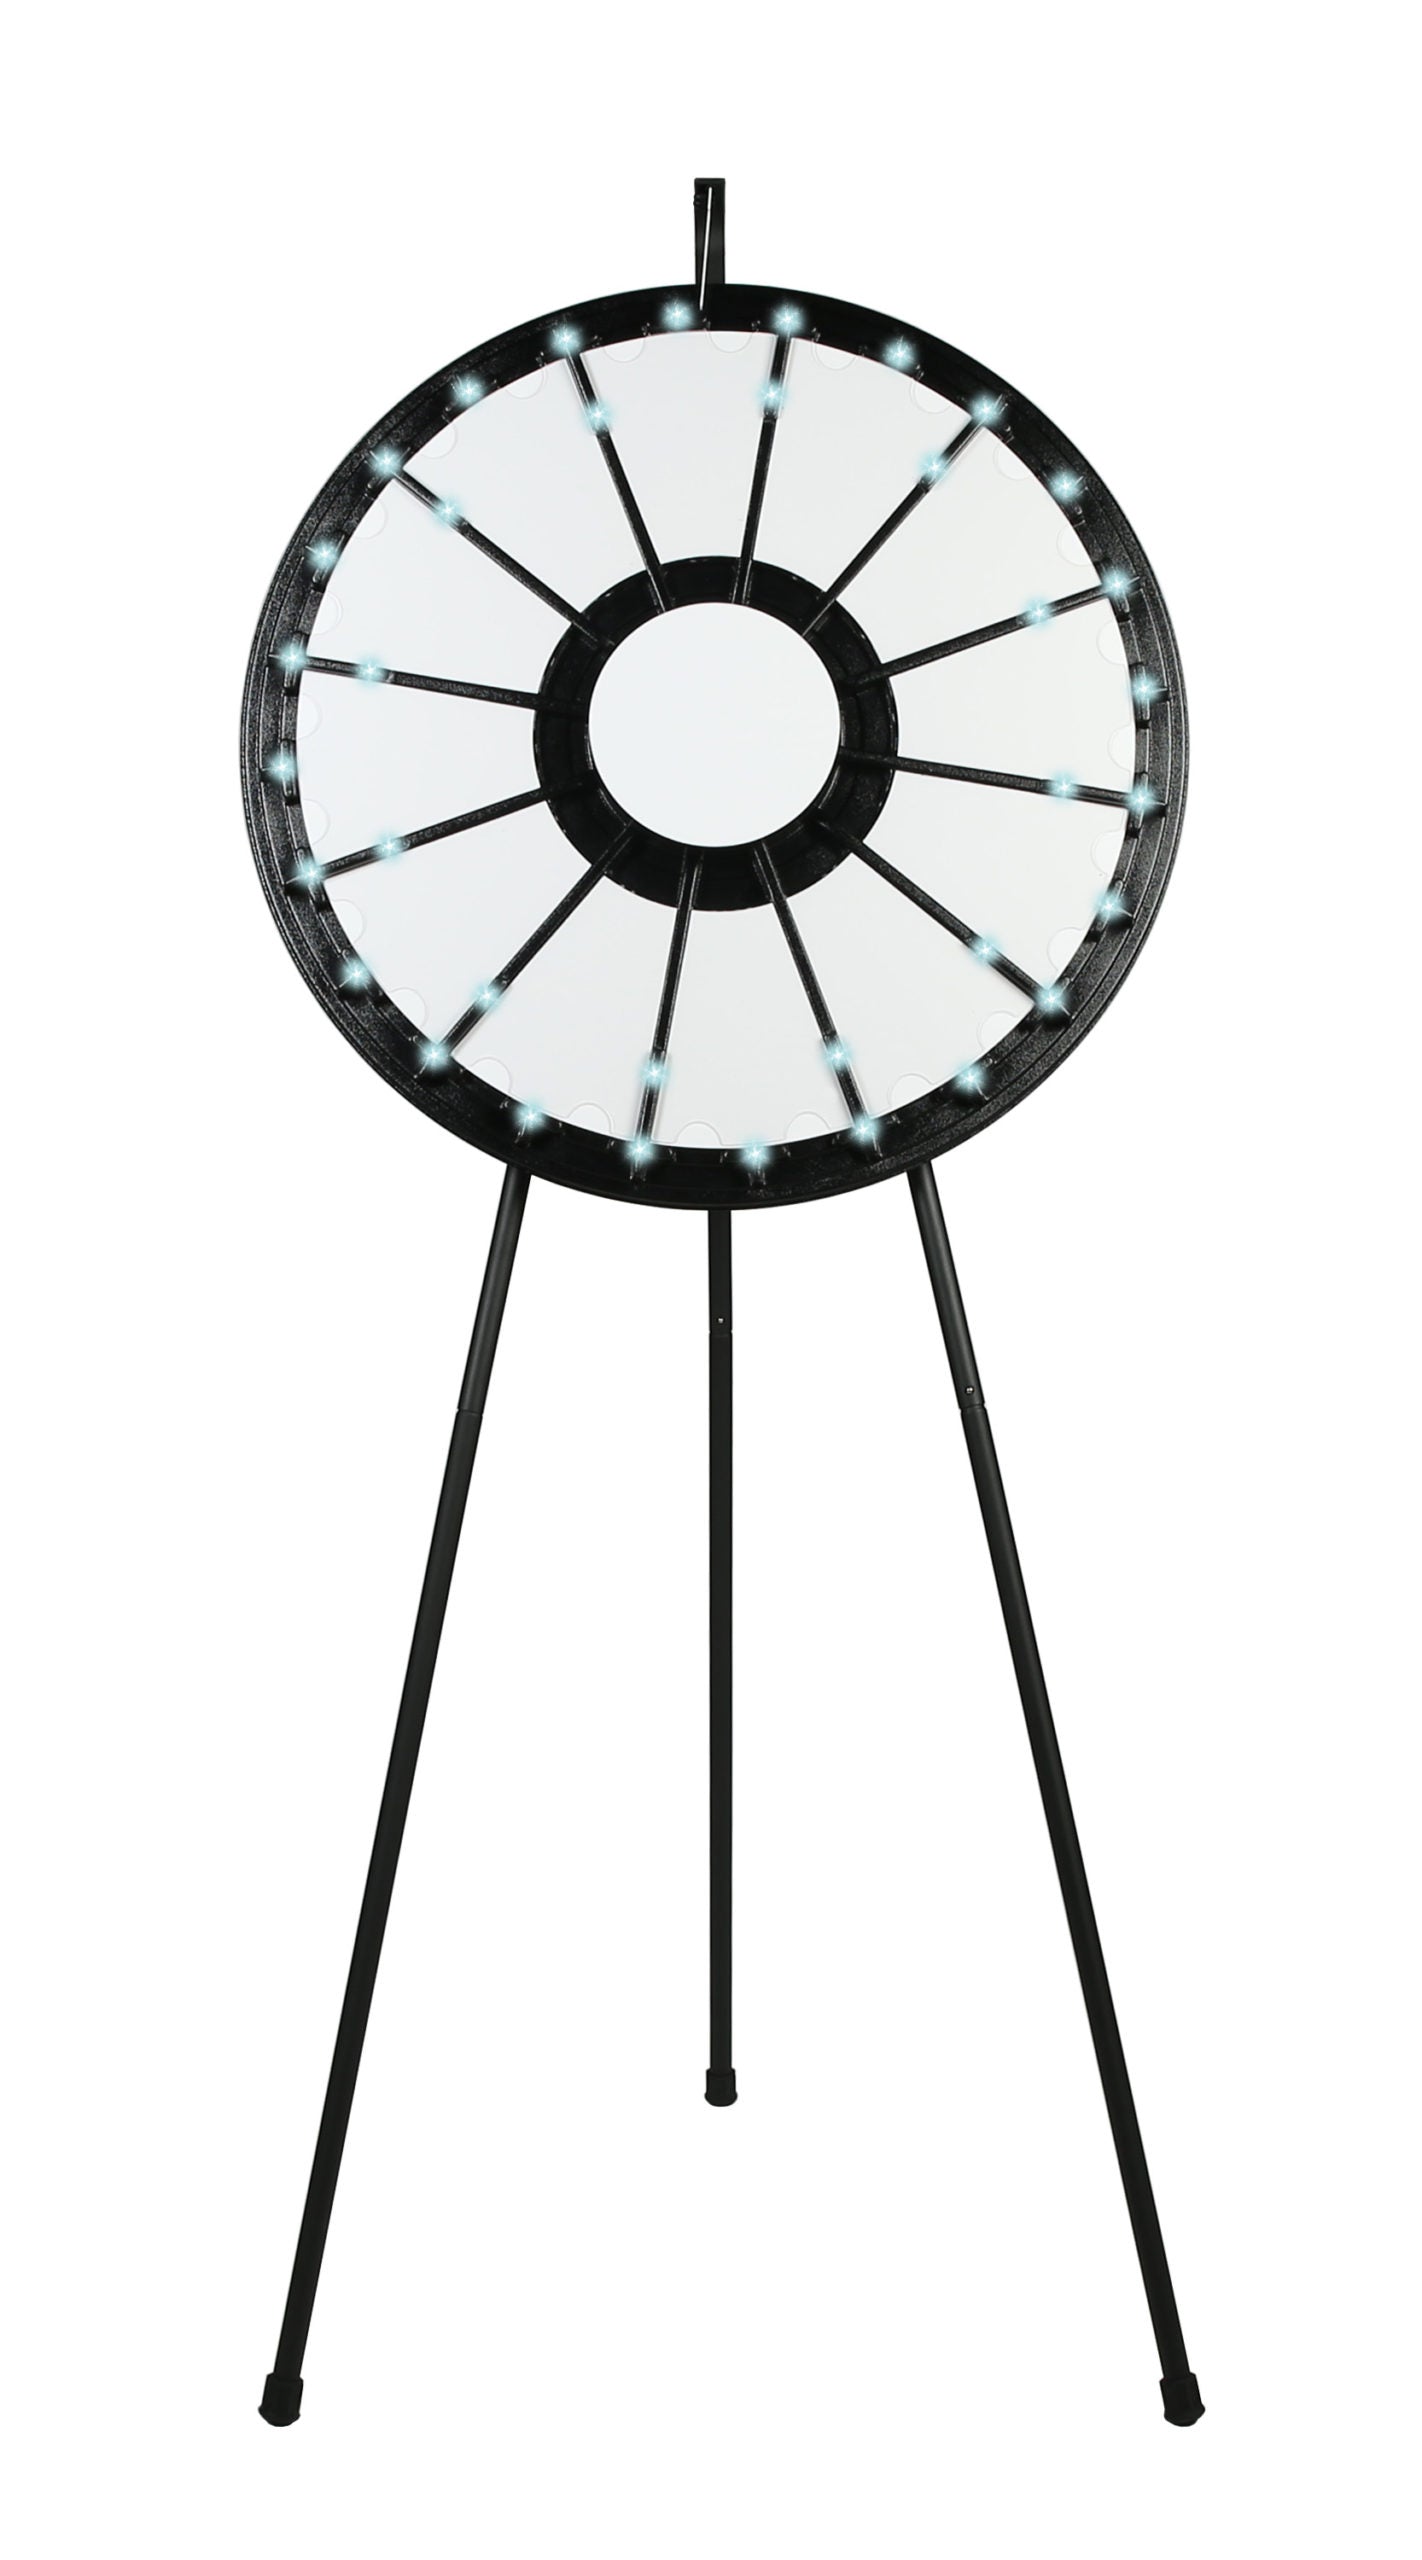 12 to 24-slot Floor stand Classic Prize Wheel with Lights